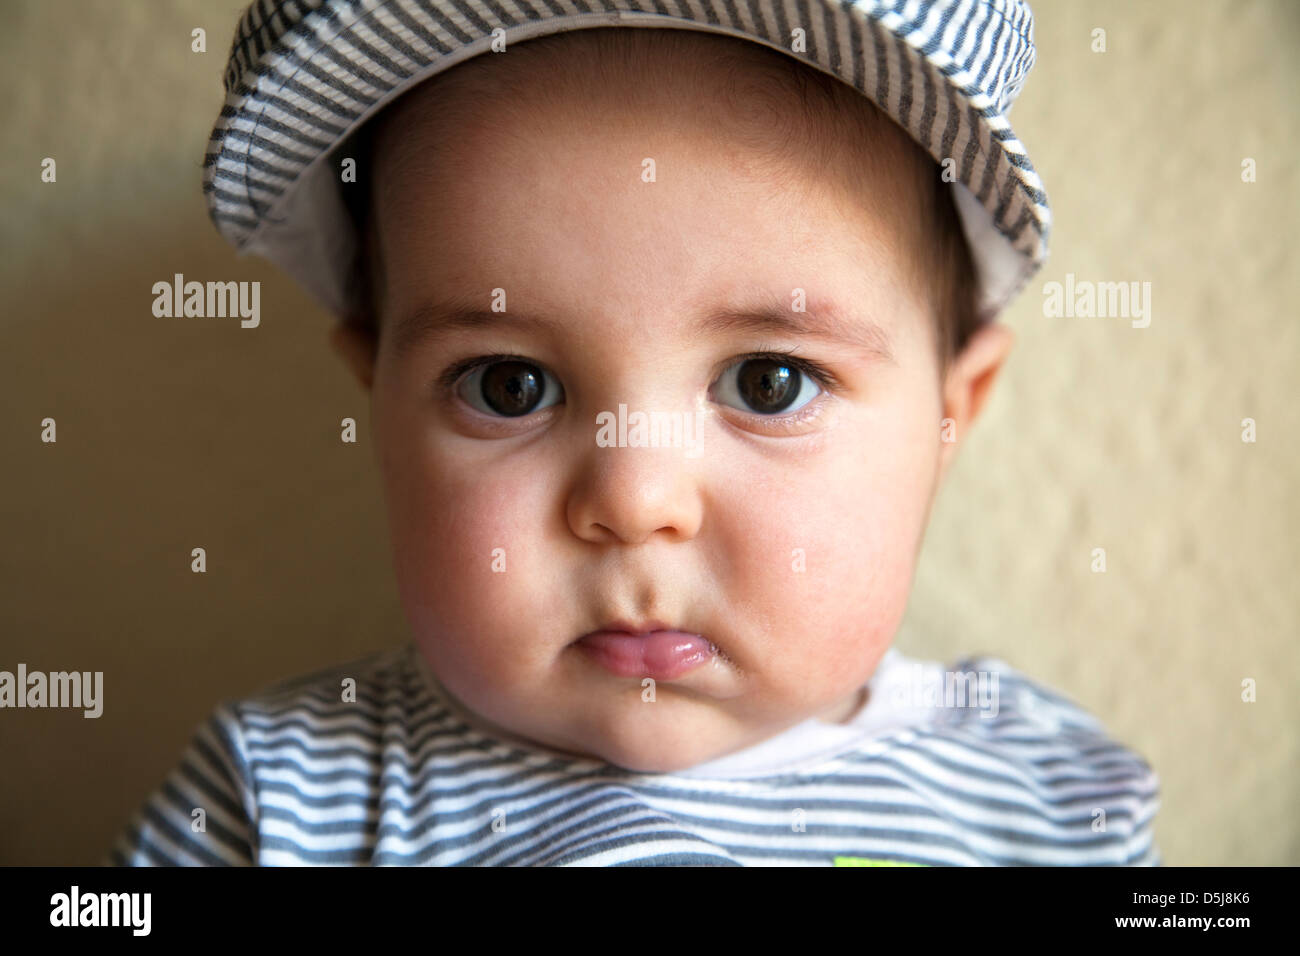 Boy Wearing Flat Cap High Resolution Stock Photography And Images Alamy